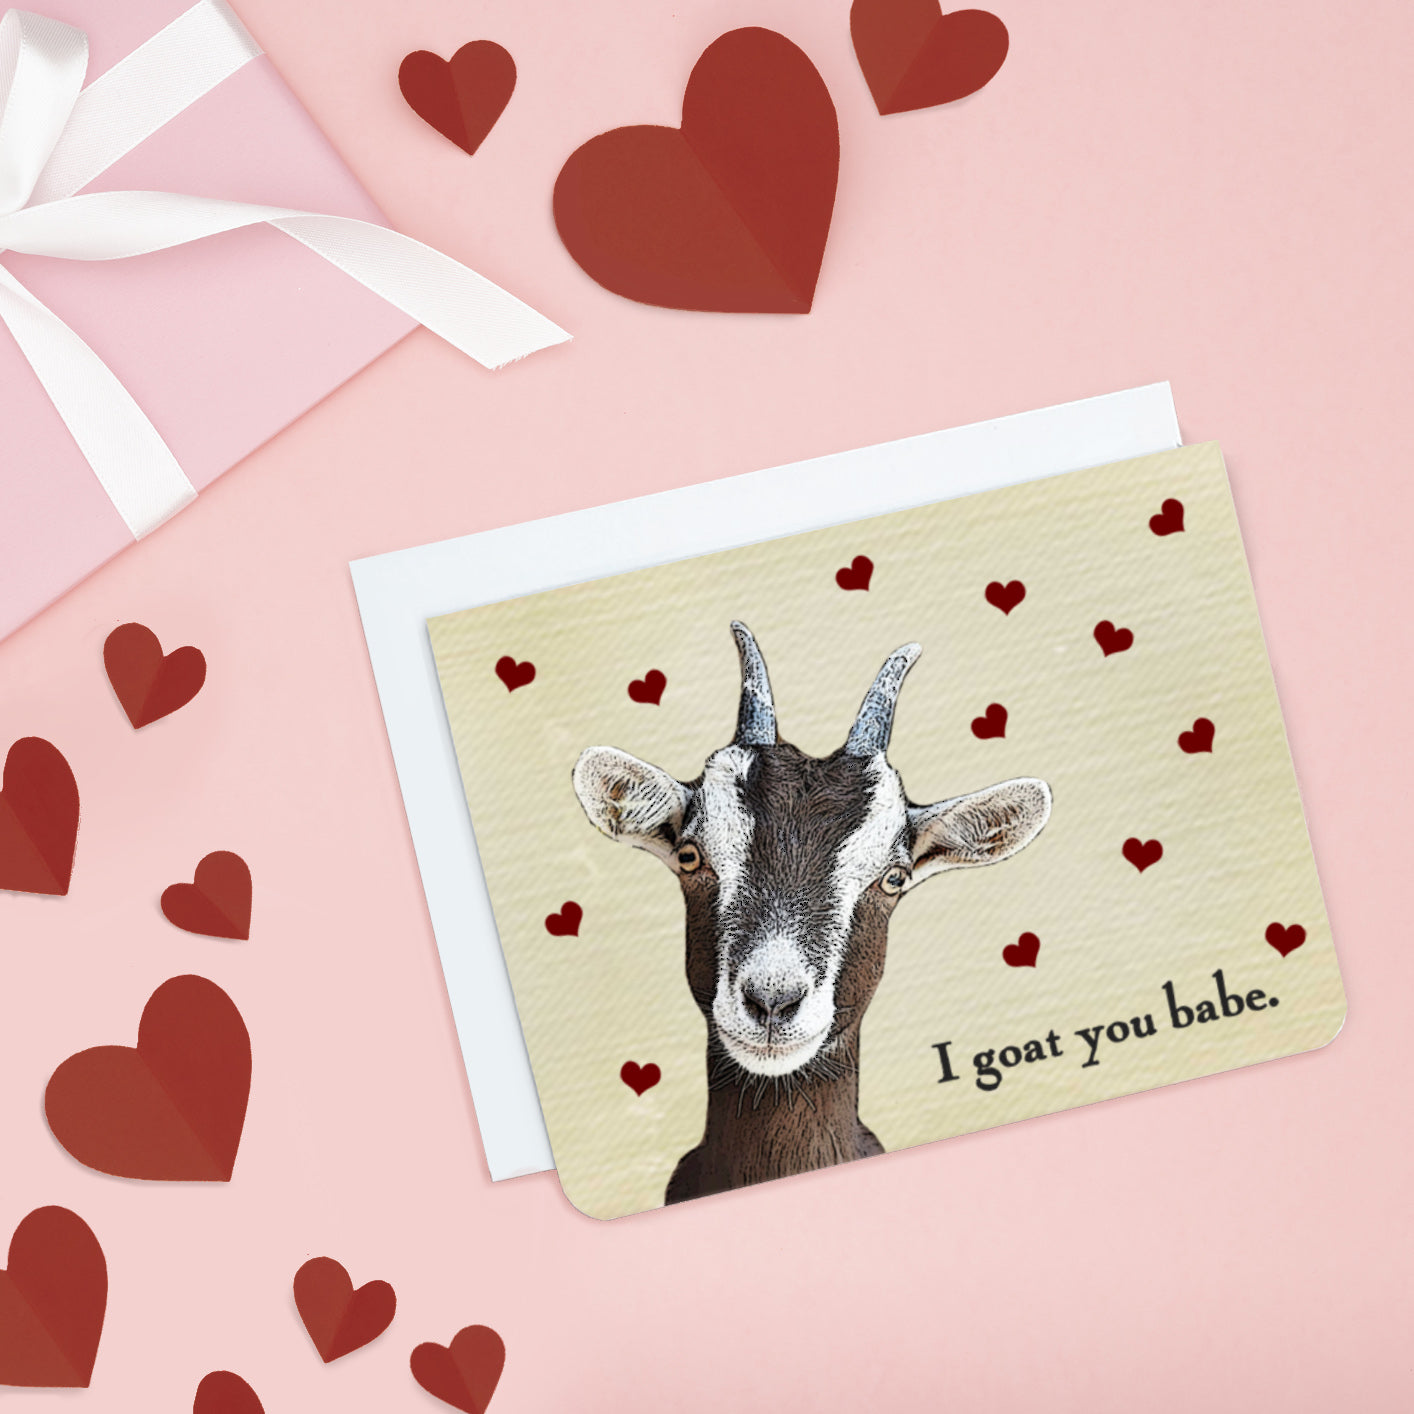 A photo a cute card. It has a cartoon goat on it, text on card says 'I goat you babe.'